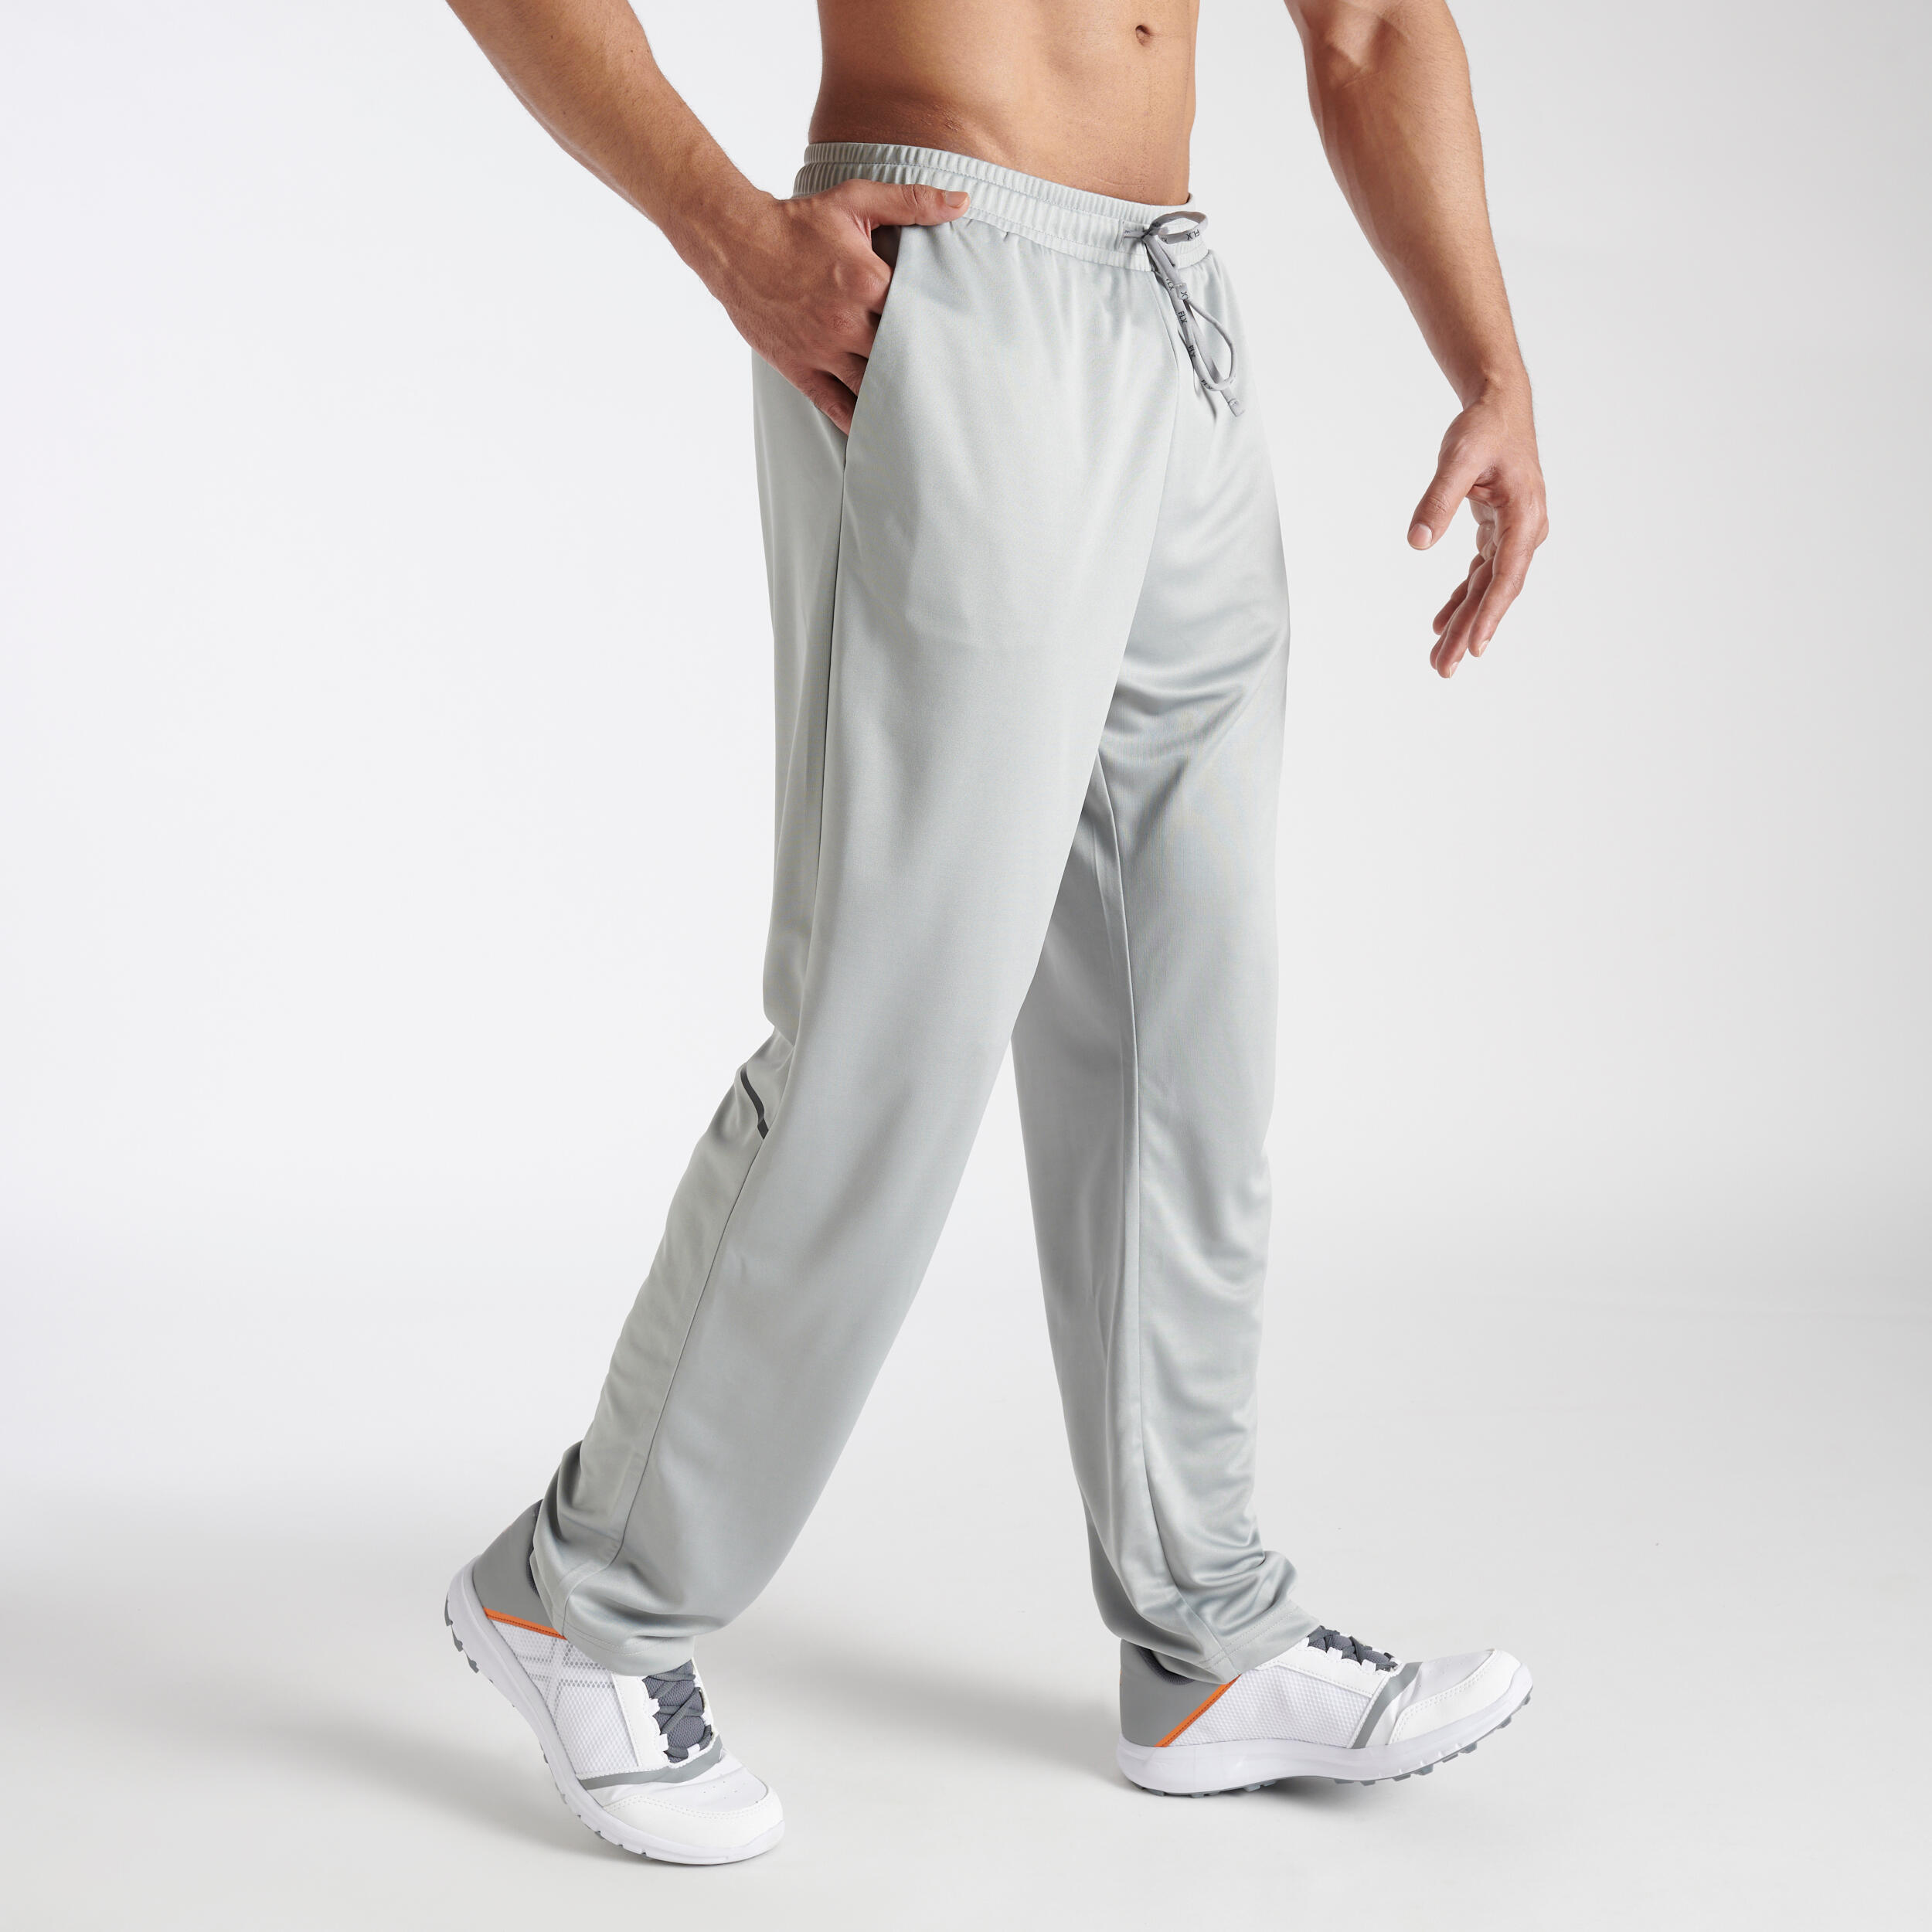 Decathlon Sports India - Our cricket passionate team has developed this  sweat managing straight fit trouser for you to practice cricket comfortably  under the sun. Lightweight sweat absorbing fabric makes cricket comfortable